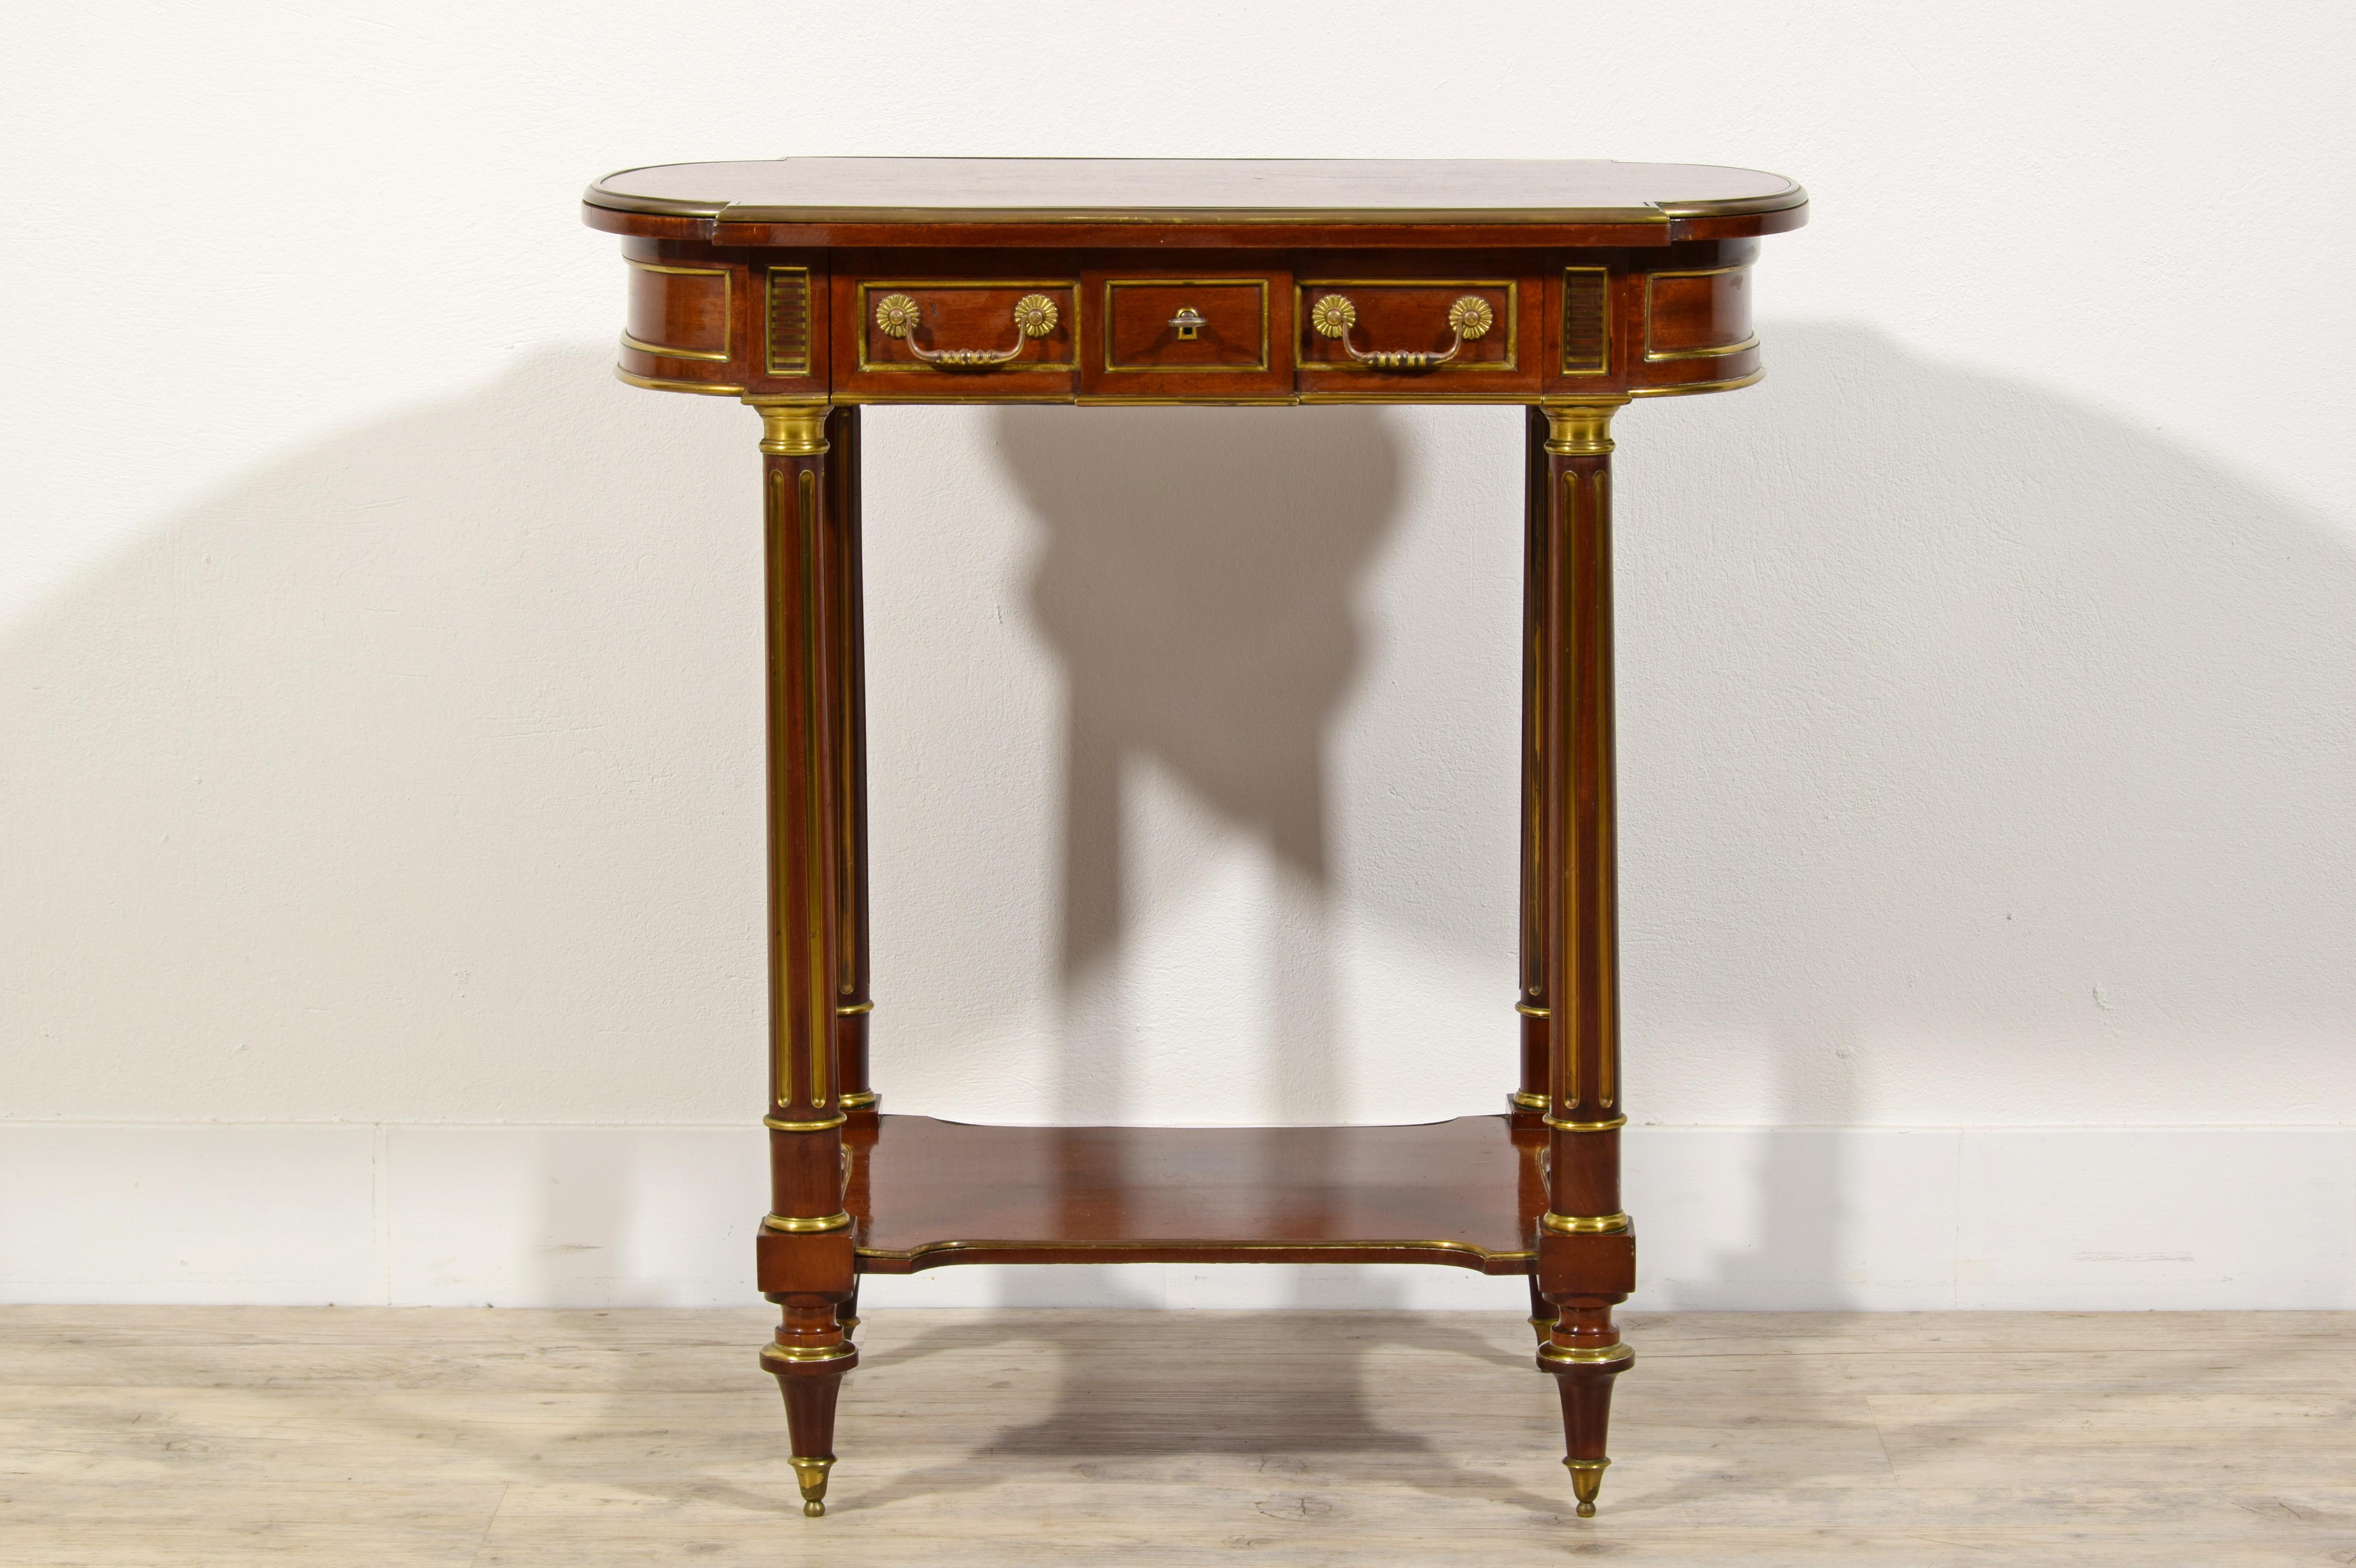 19Th Century, French Wood and Gilt Bronze Centre Table 
Measures: cm L 69 x P 41 x H 73. The legs have a max width of cm 48.5 x P 39

The center table dates back to the early nineteenth century, French manufacture.
In wood, it consists of a